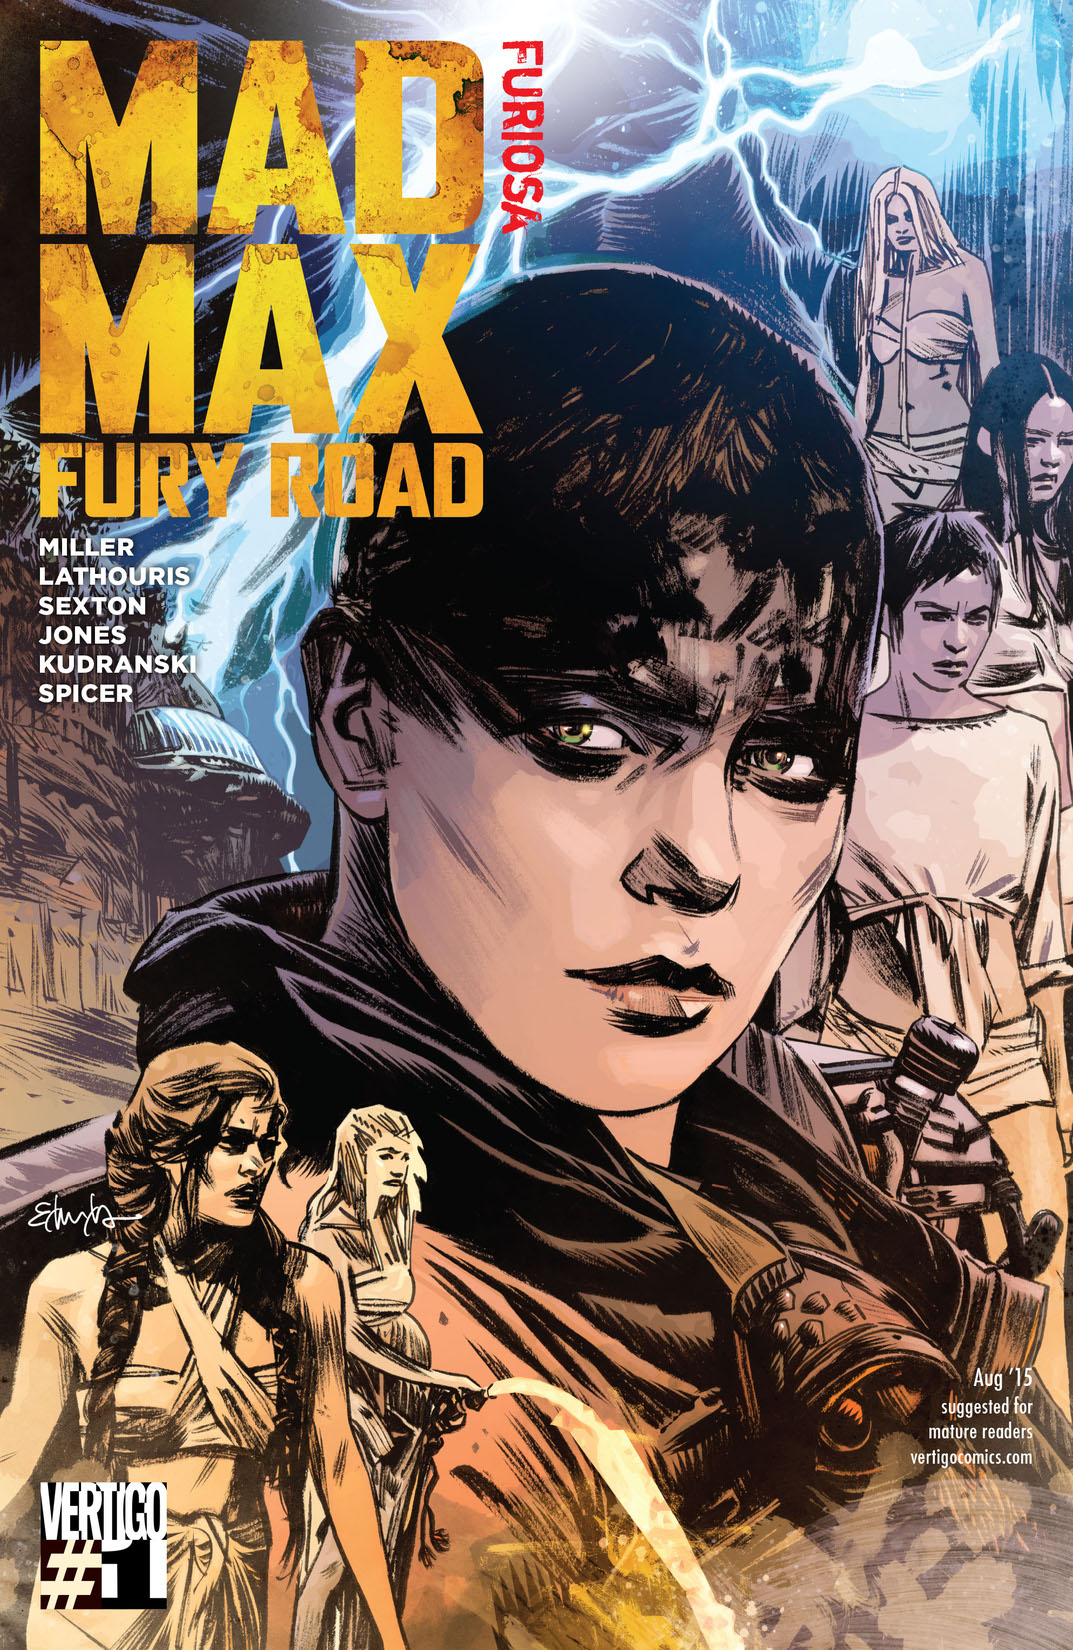 Mad Max: Fury Road: Furiosa #1 preview images